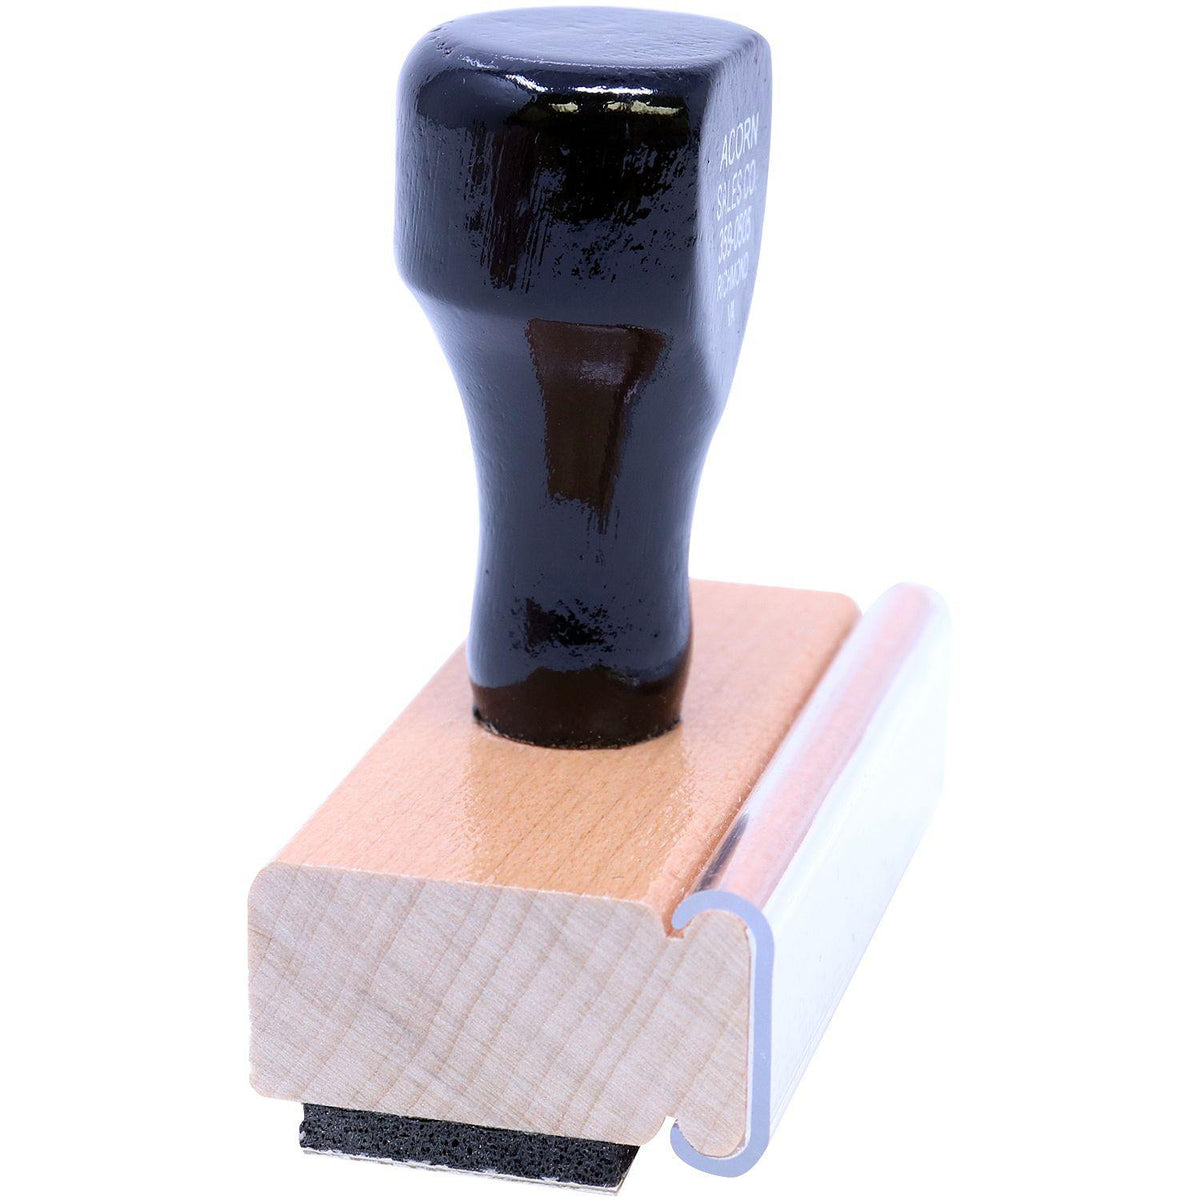 Side View of Large Cleaned and Sanitized Rubber Stamp at an Angle